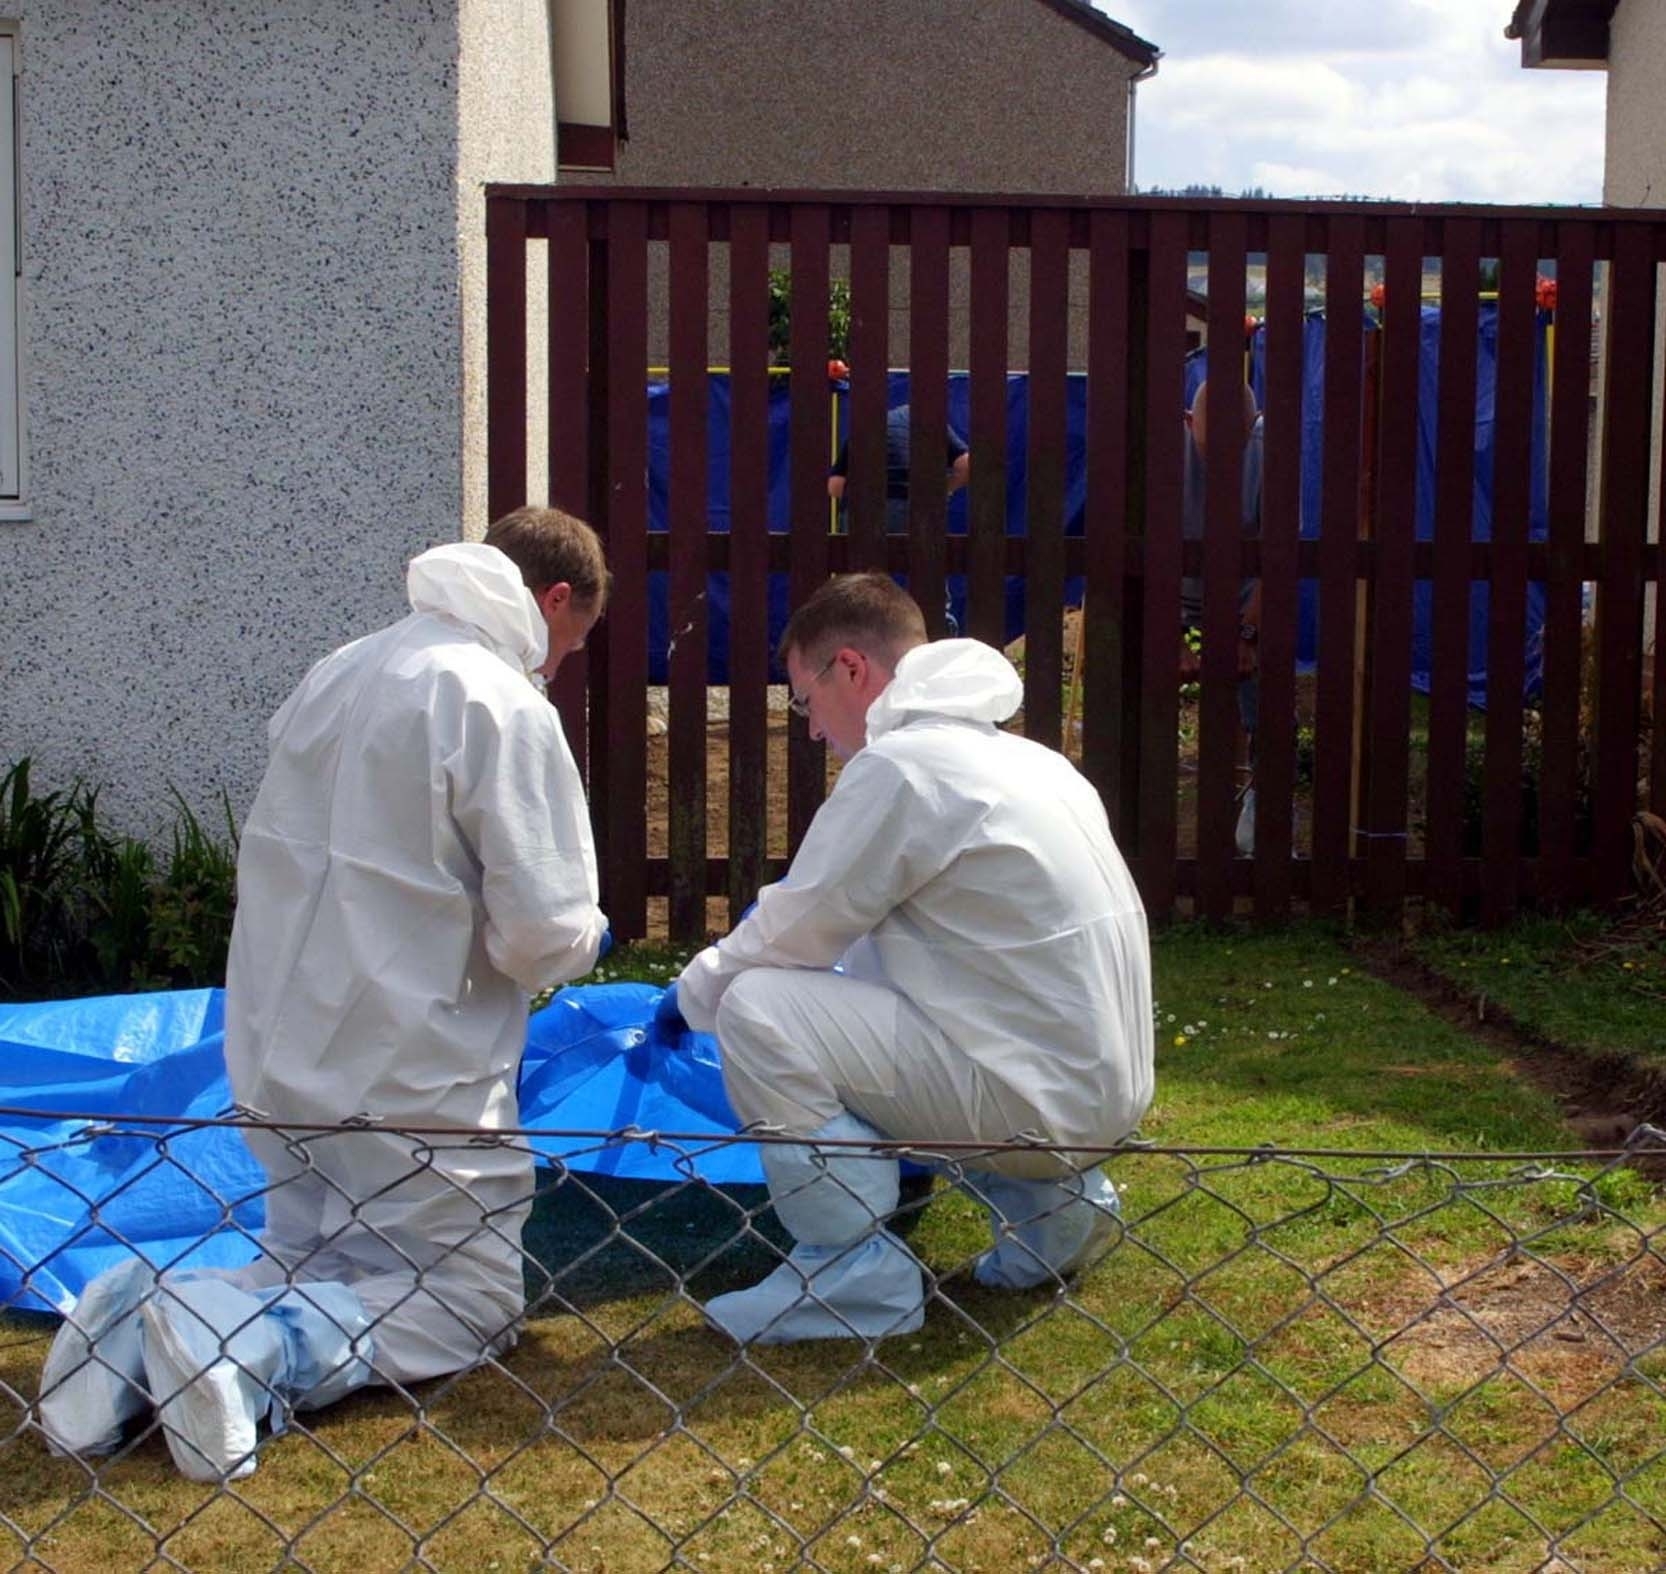 Forensics at the scene in 2006 